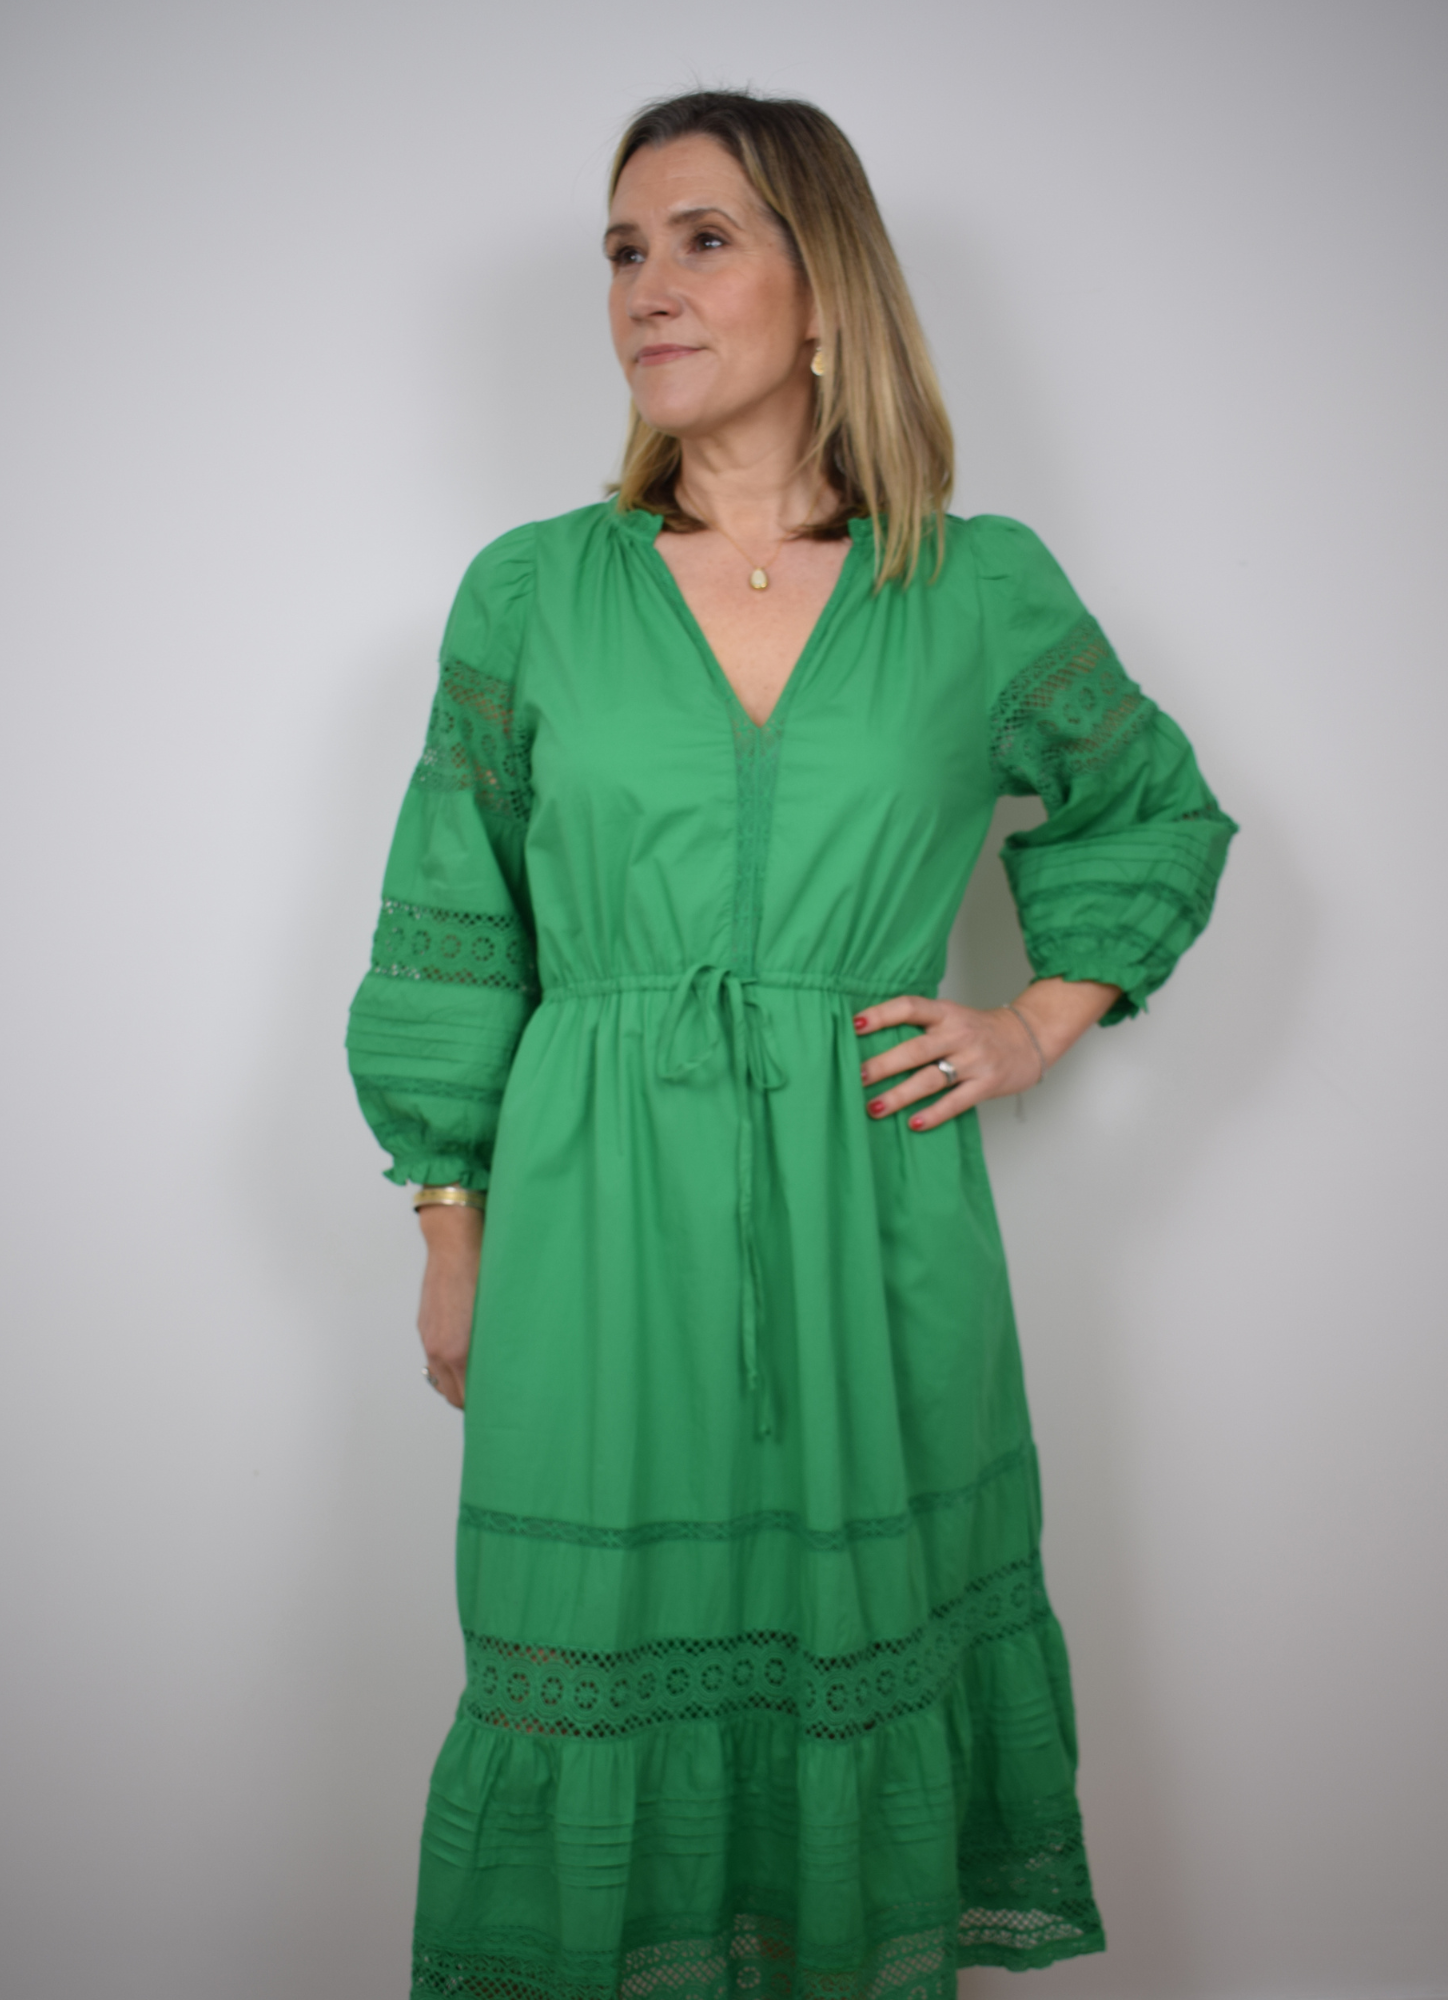 Green dress with draw string belt and lace deatil